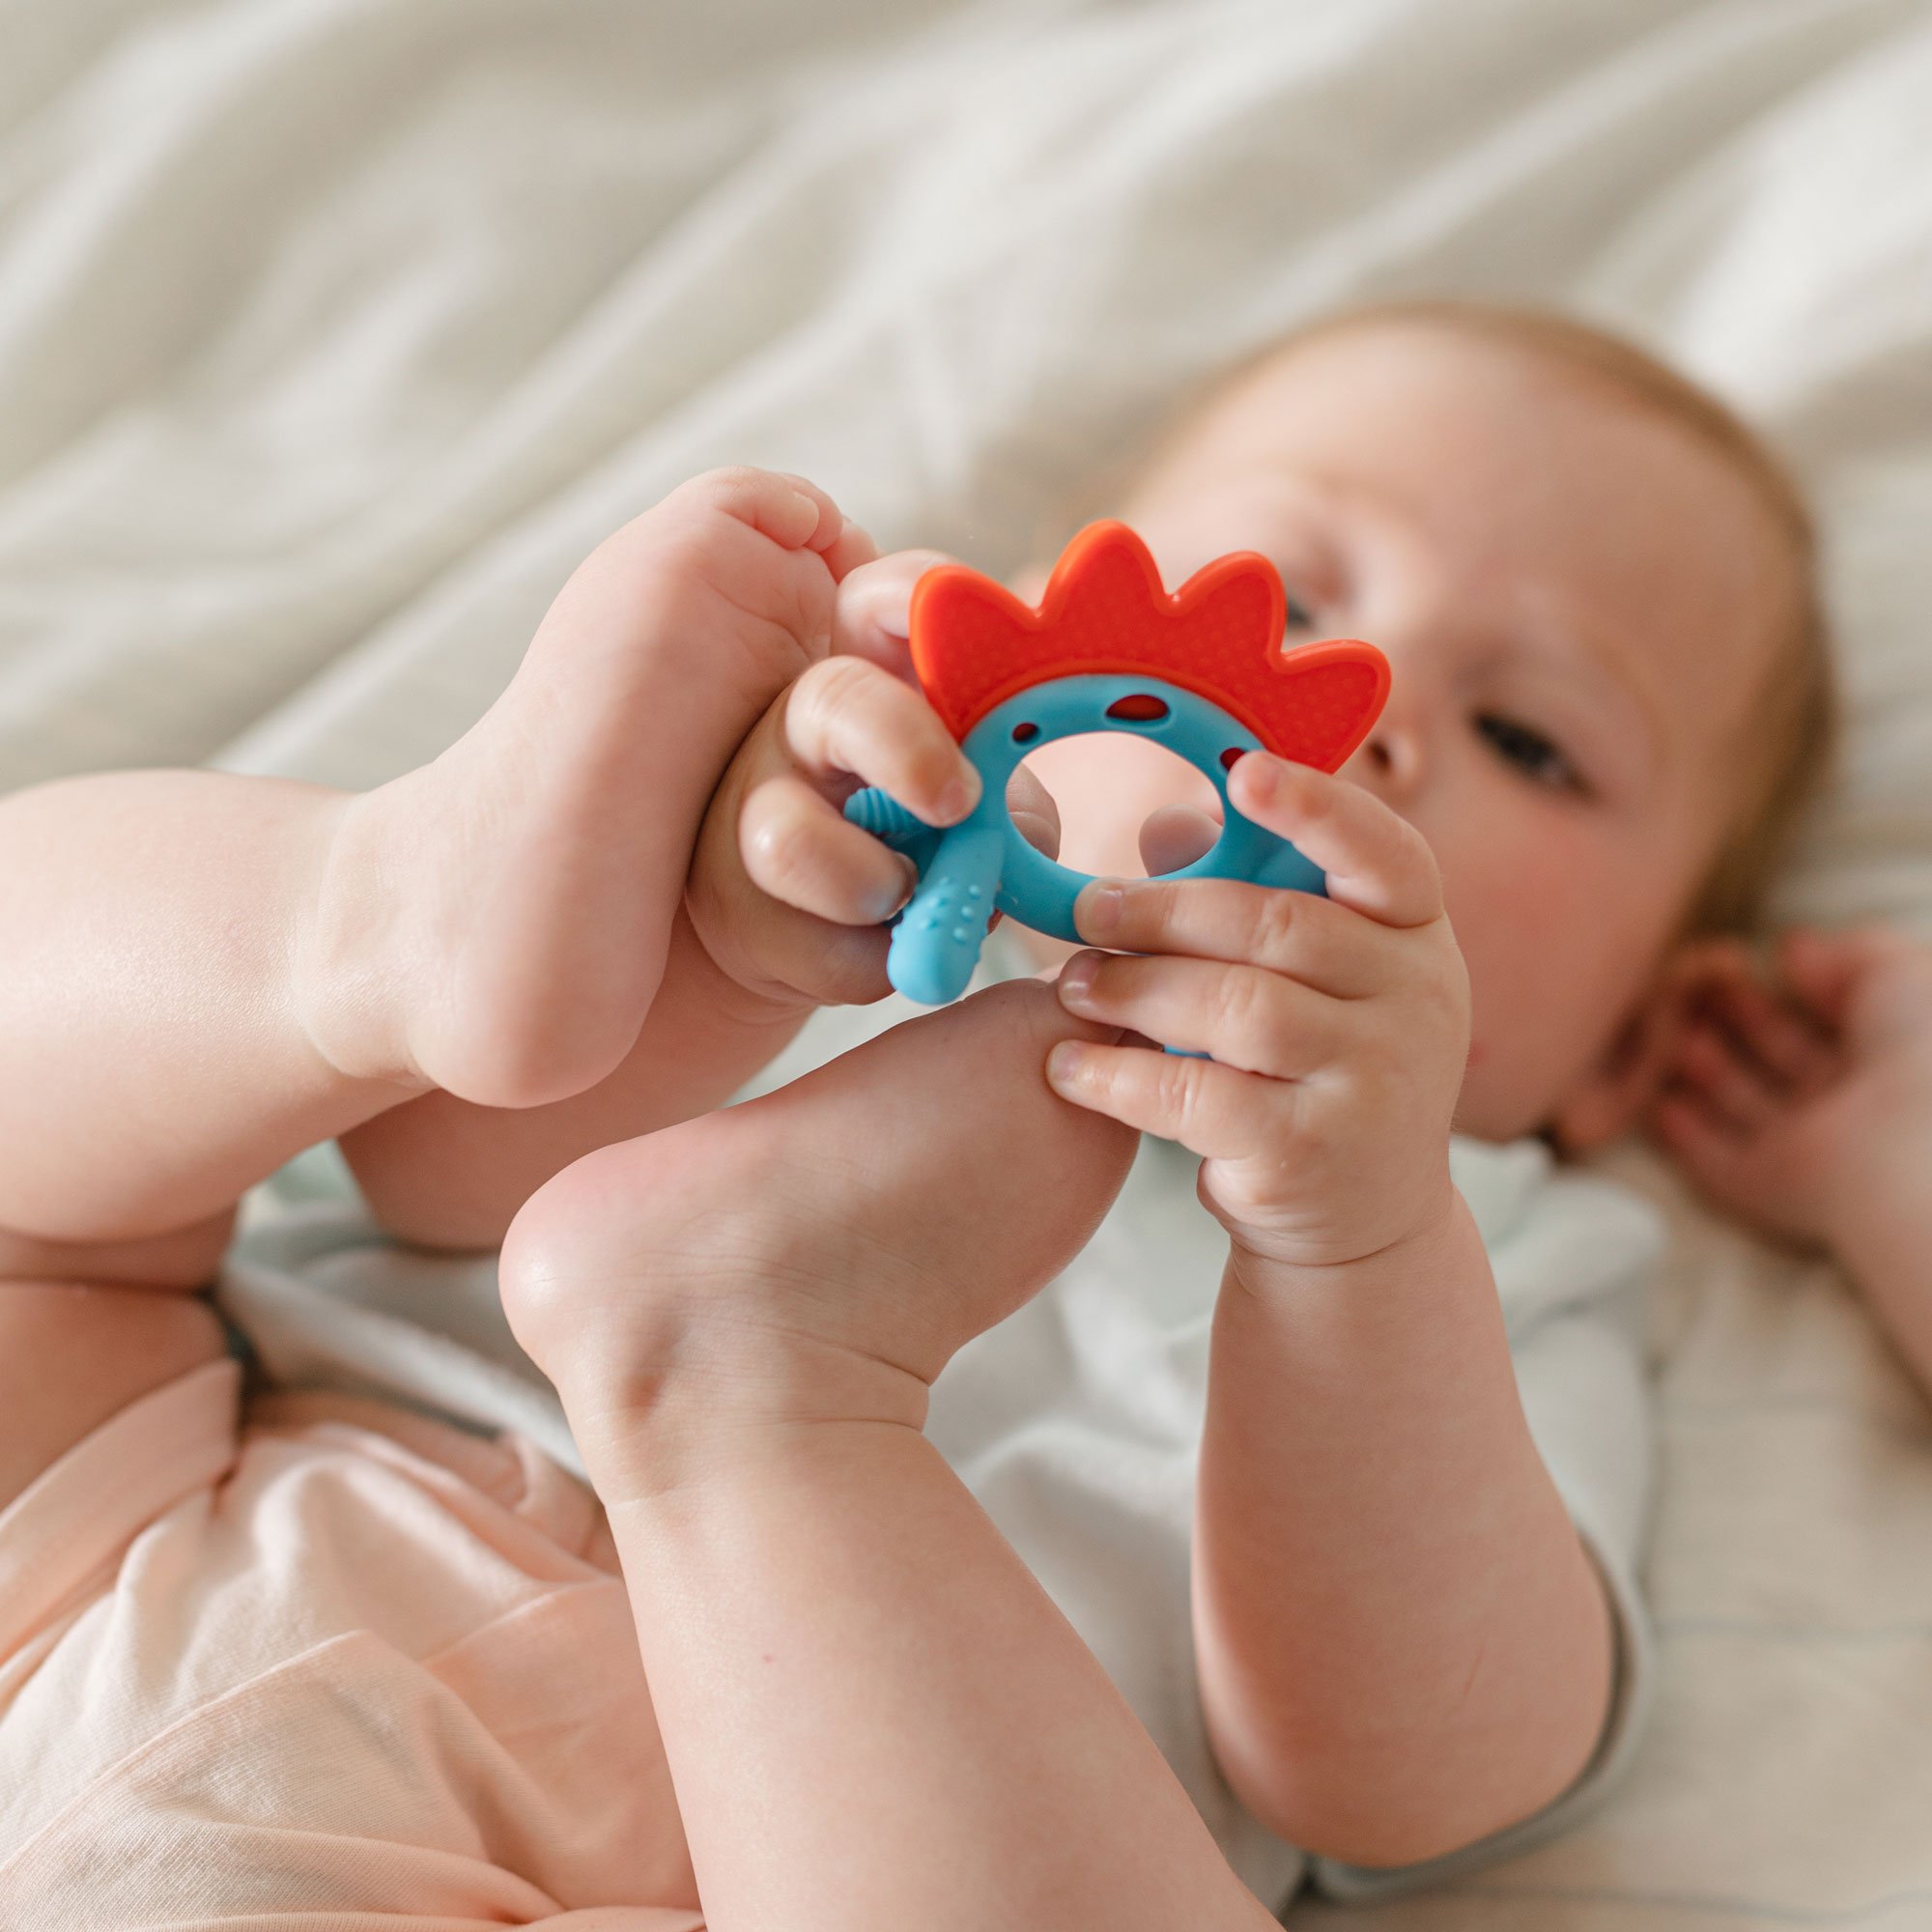 Baby Playing with Teether